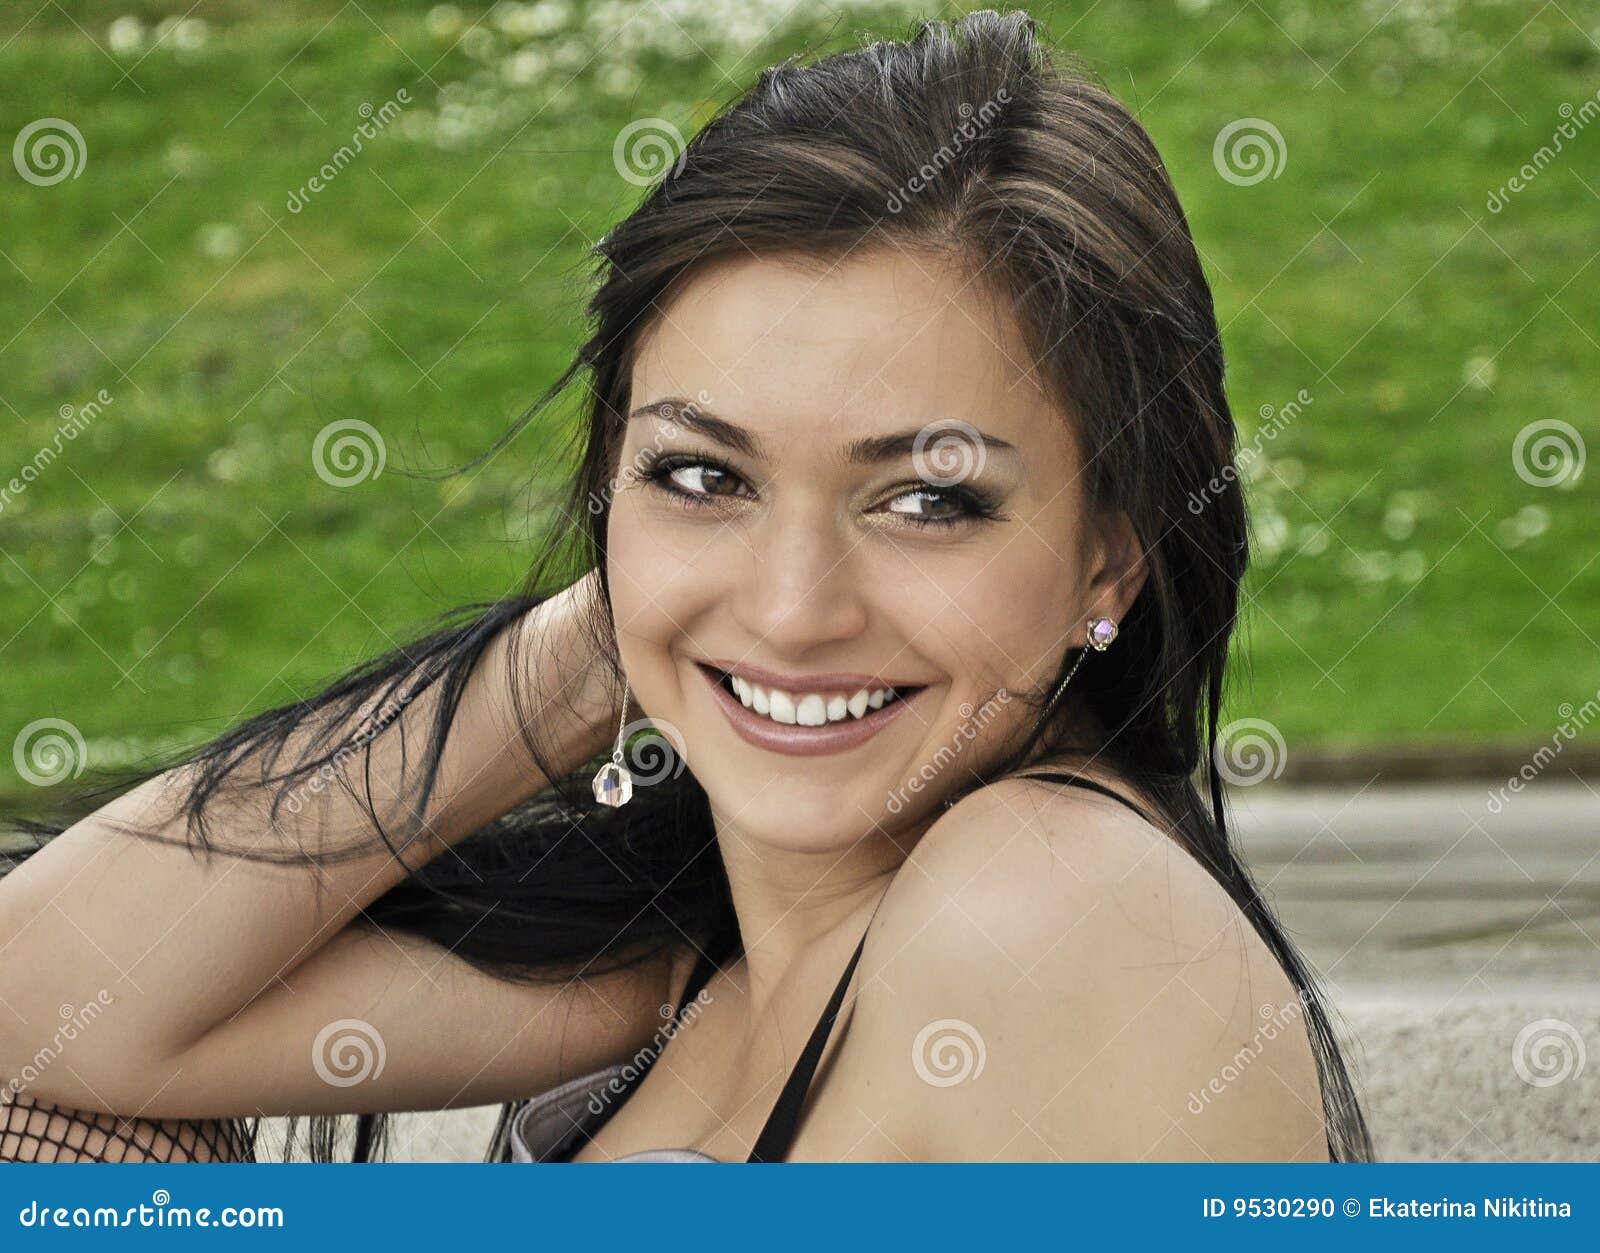 Beautiful Dark-haired Girl Smiling Stock Photo - Image of background,  rings: 9530290